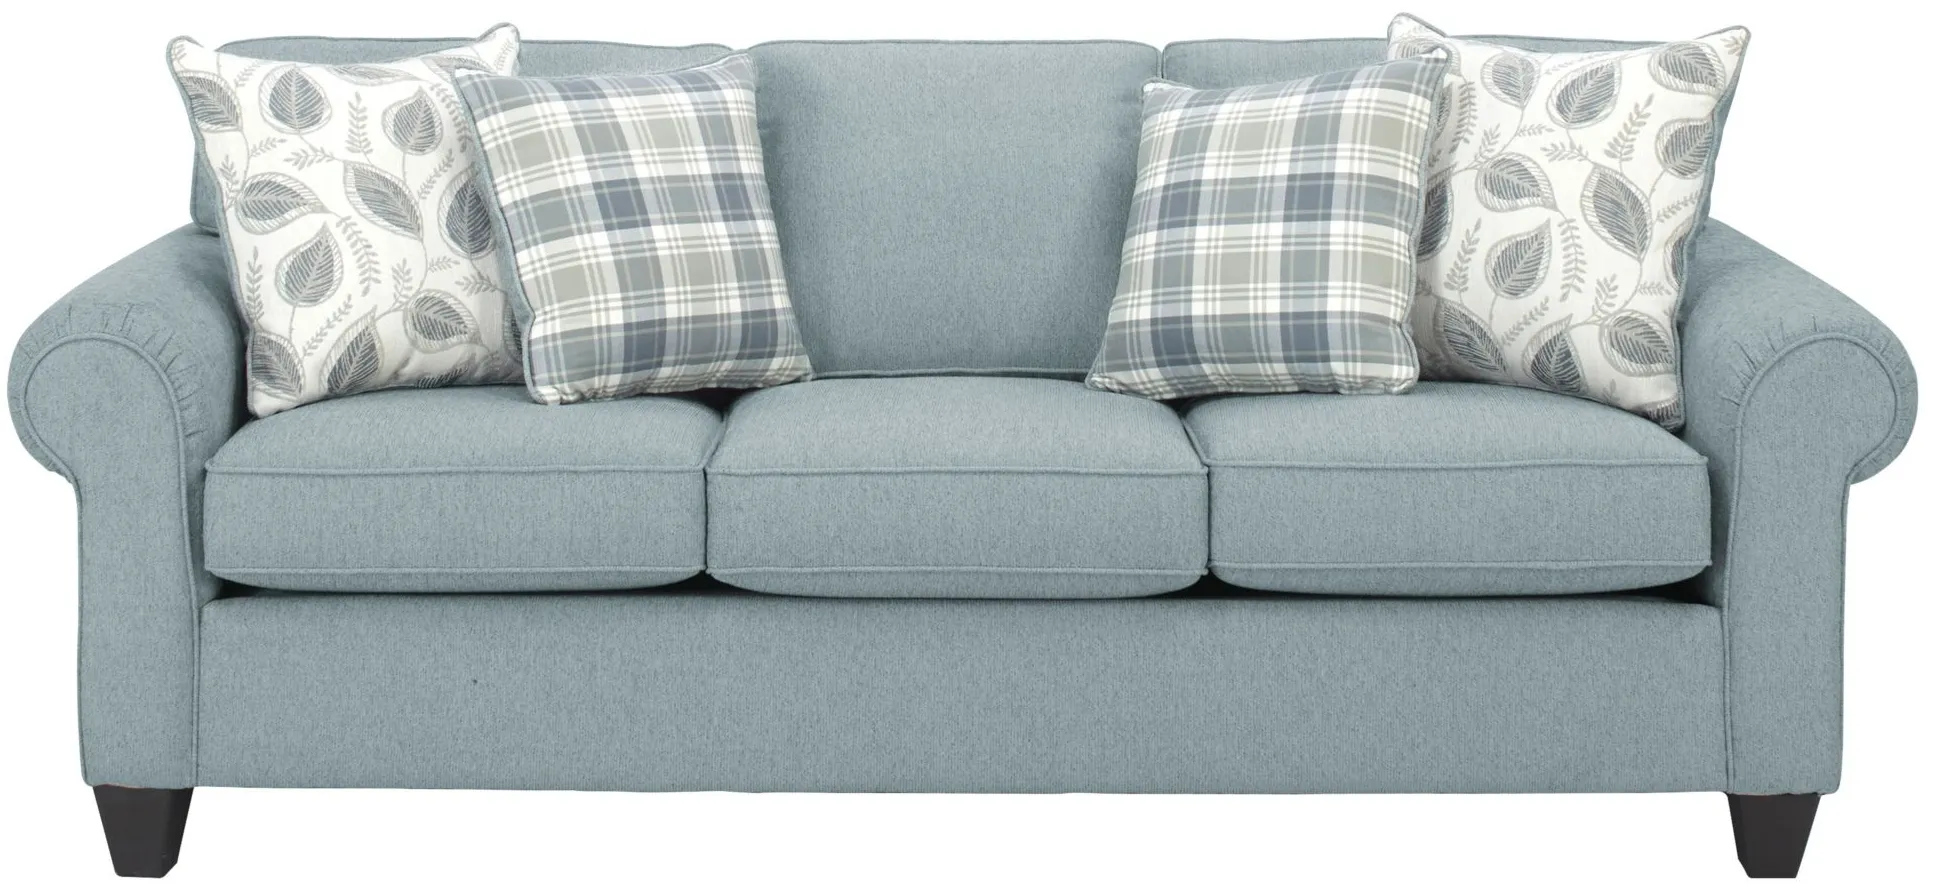 Saige 2-pc.. Chenille Sofa and Loveseat Set in Marine by Flair